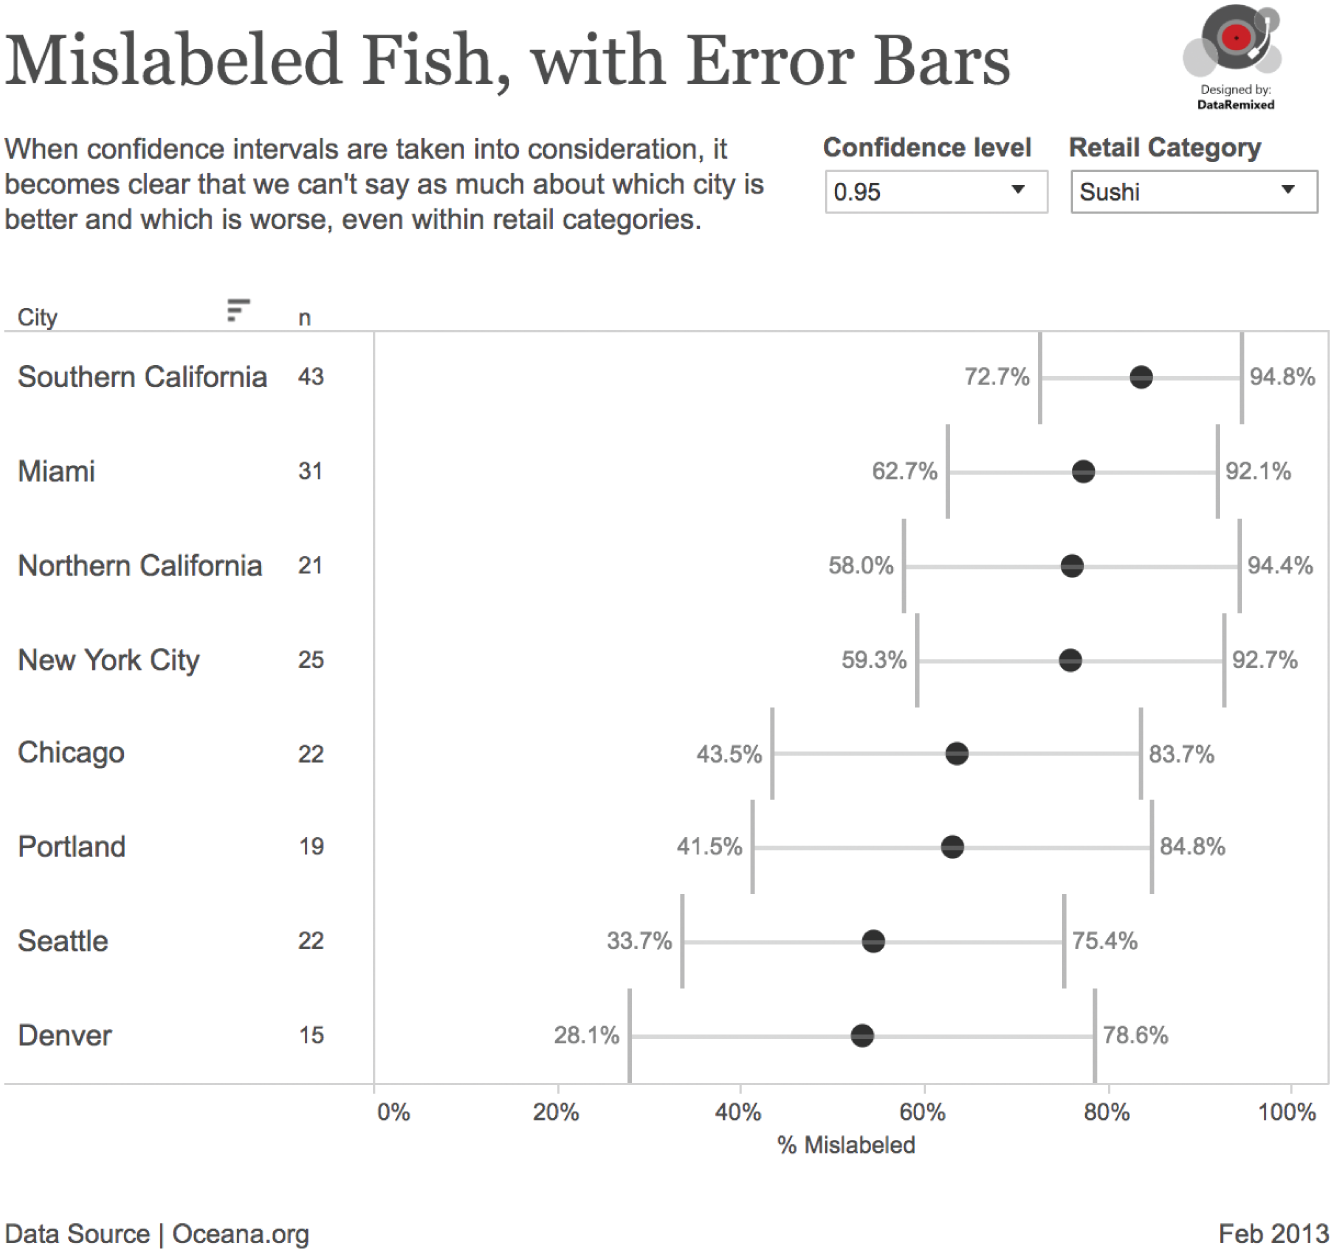 Chart depicting the data of mislabeled fish, with error bars, and with confidence intervals taken into consideration.